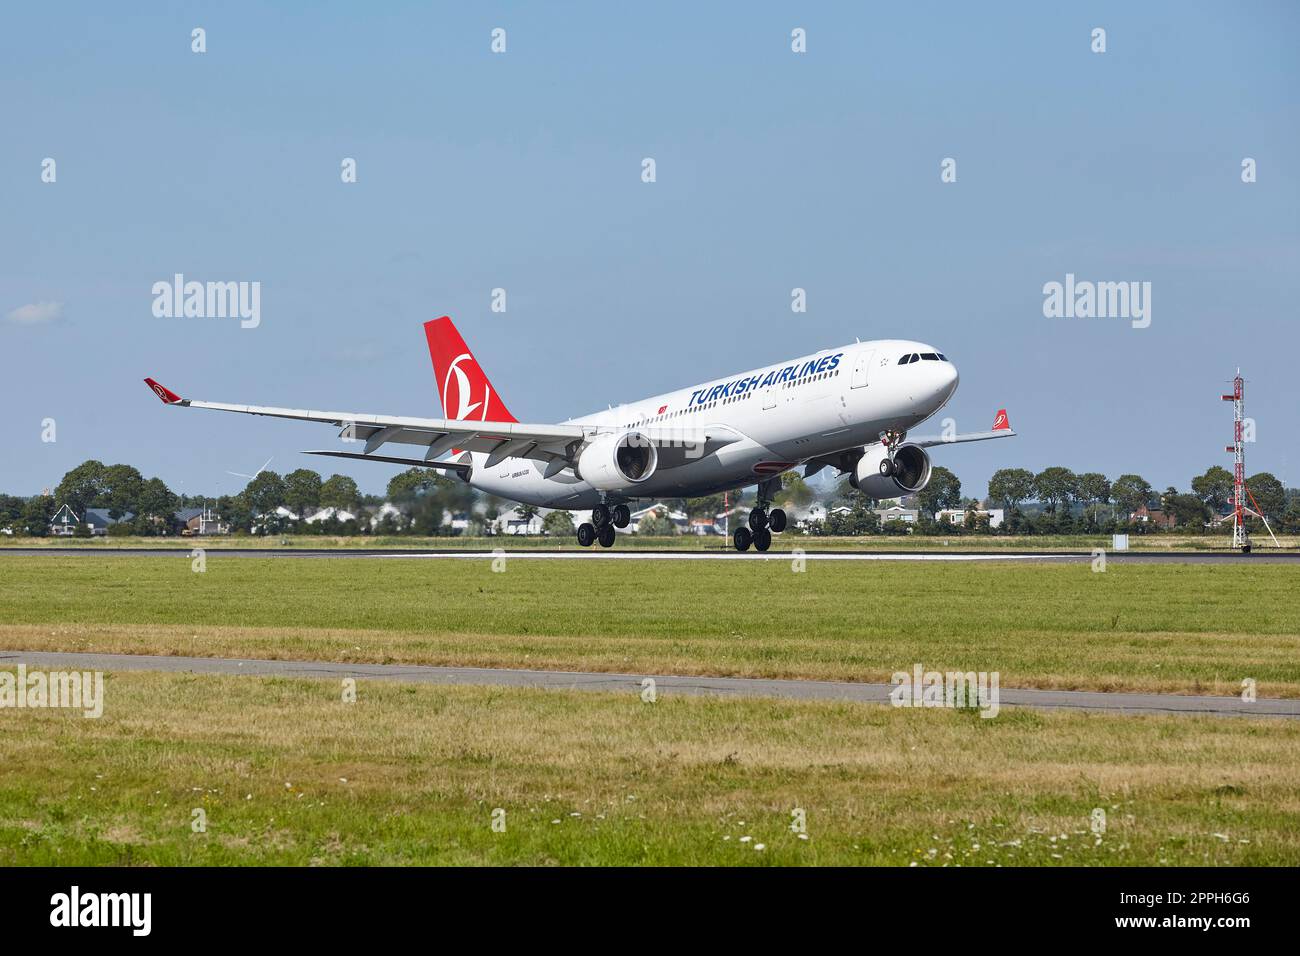 Amsterdam Airport Schiphol - Airbus A330-223 of Turkish Airlines lands Stock Photo